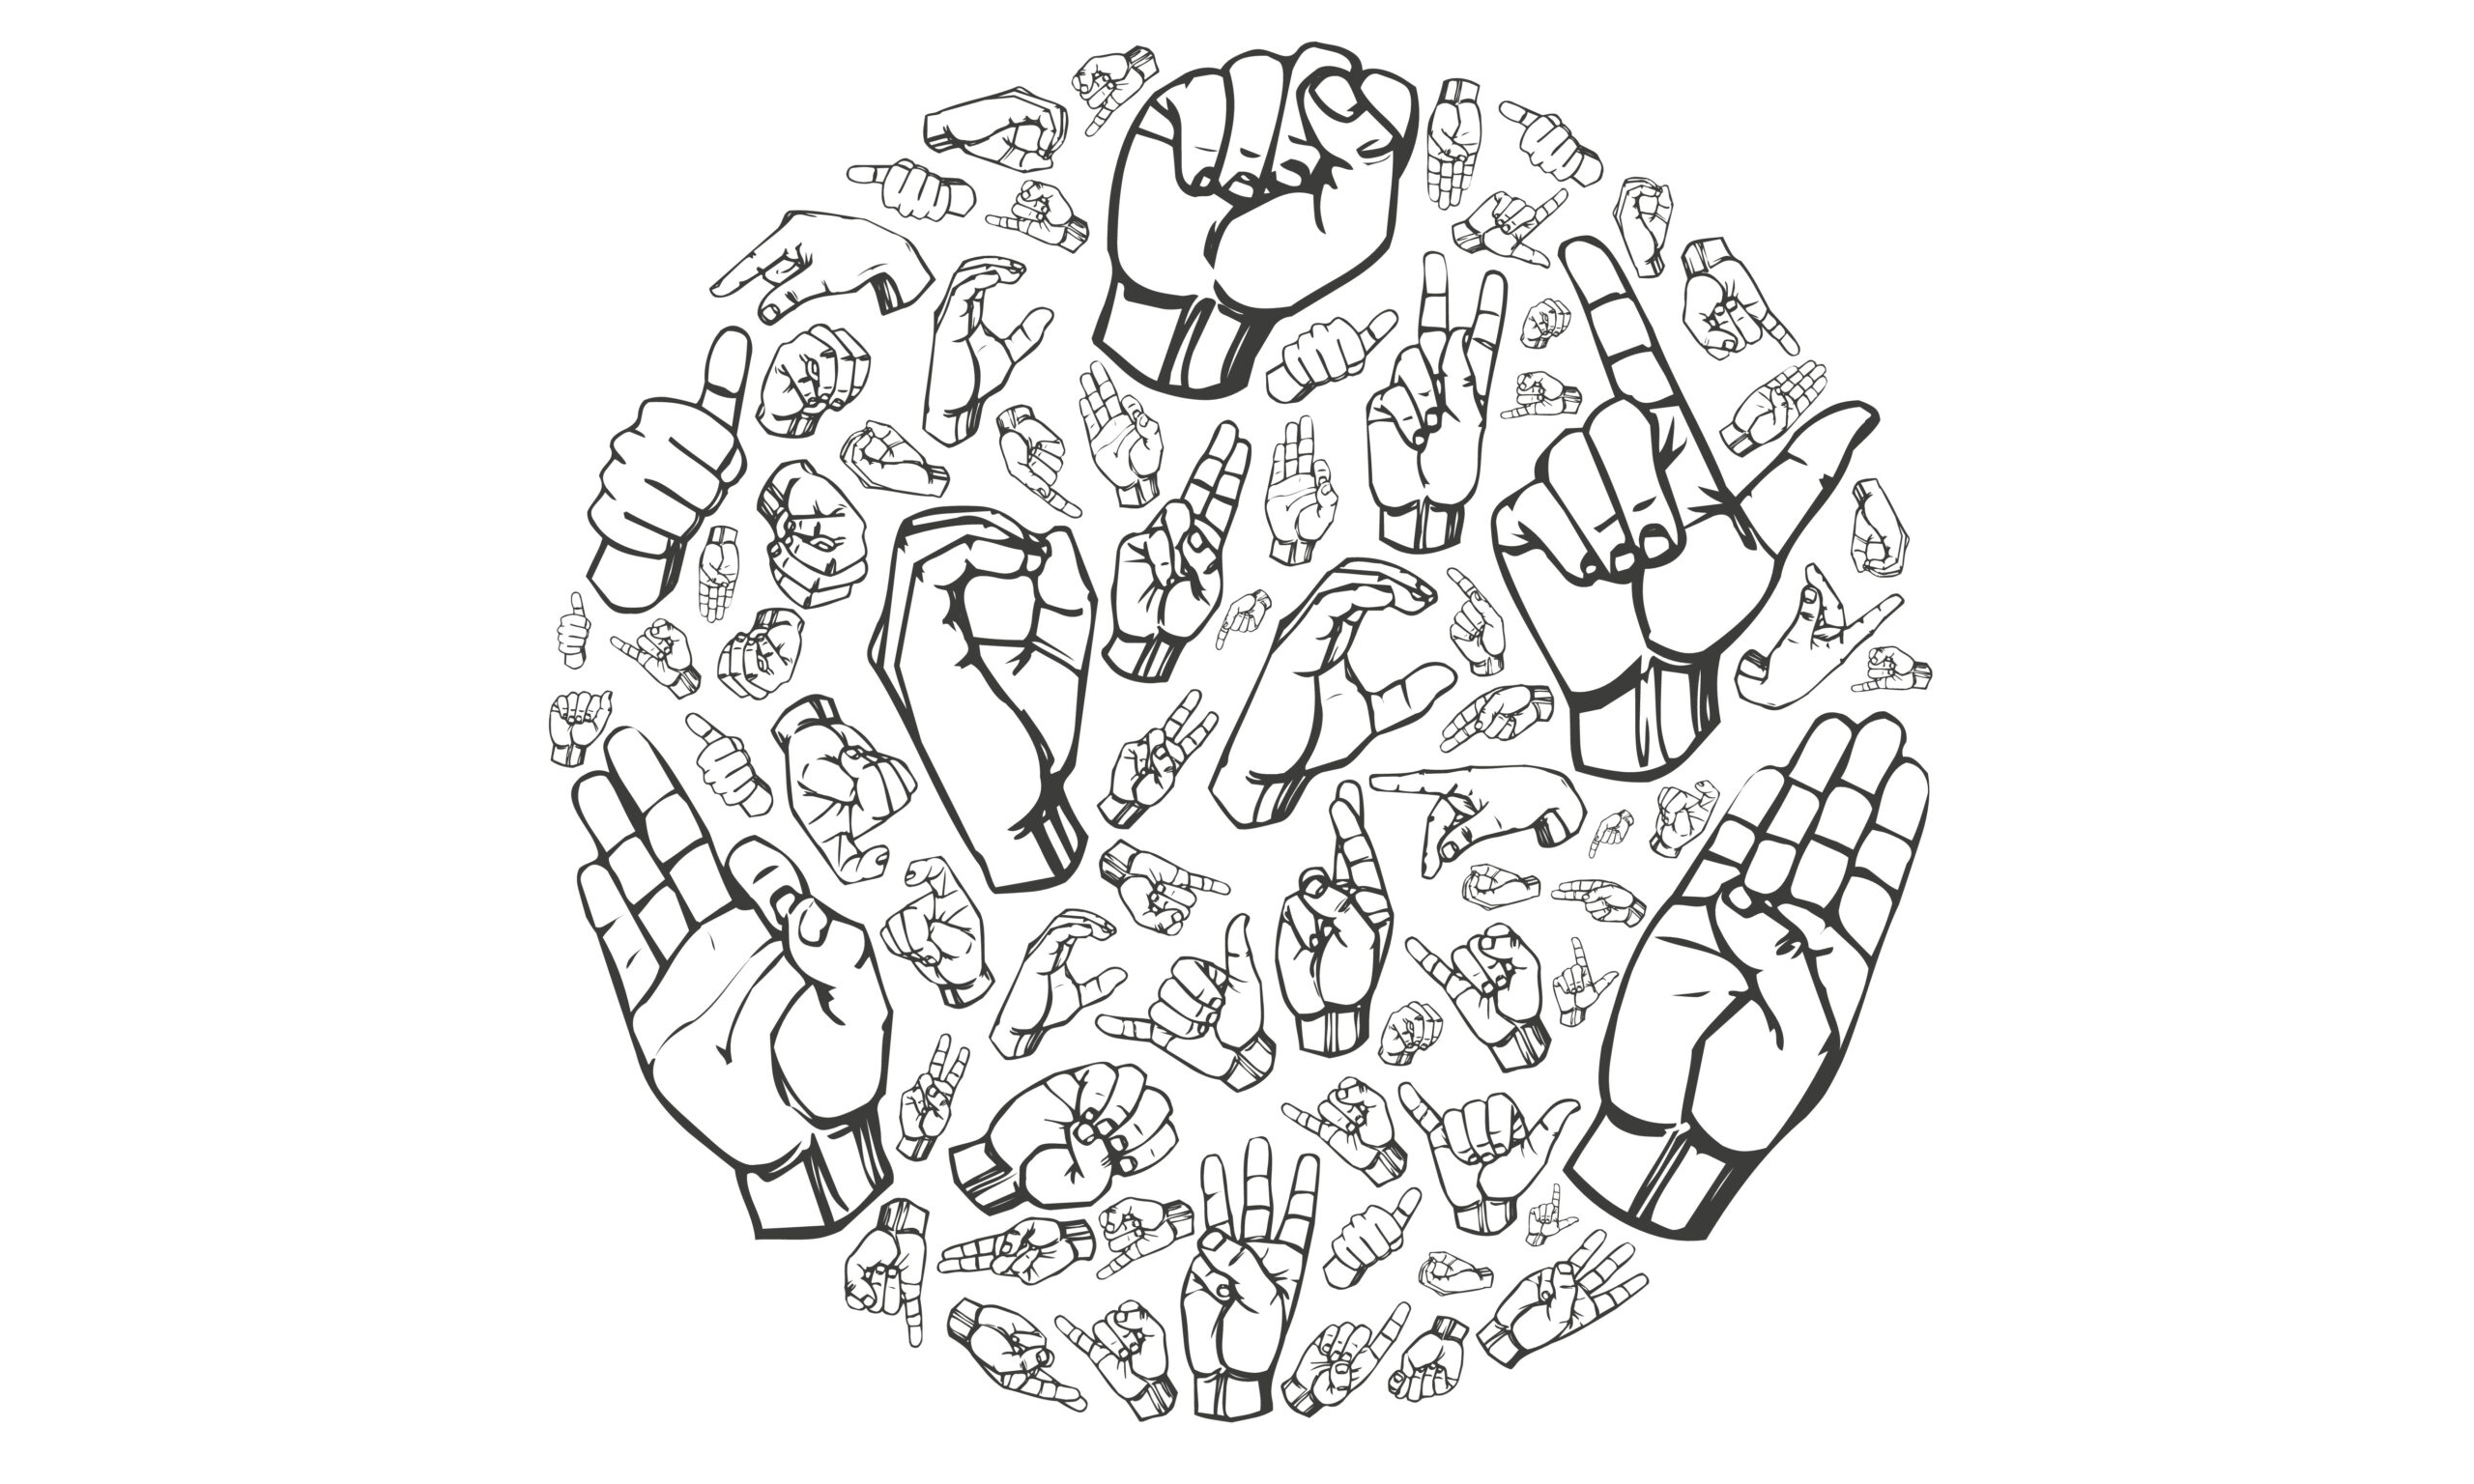 Hands forming various ASL signs.